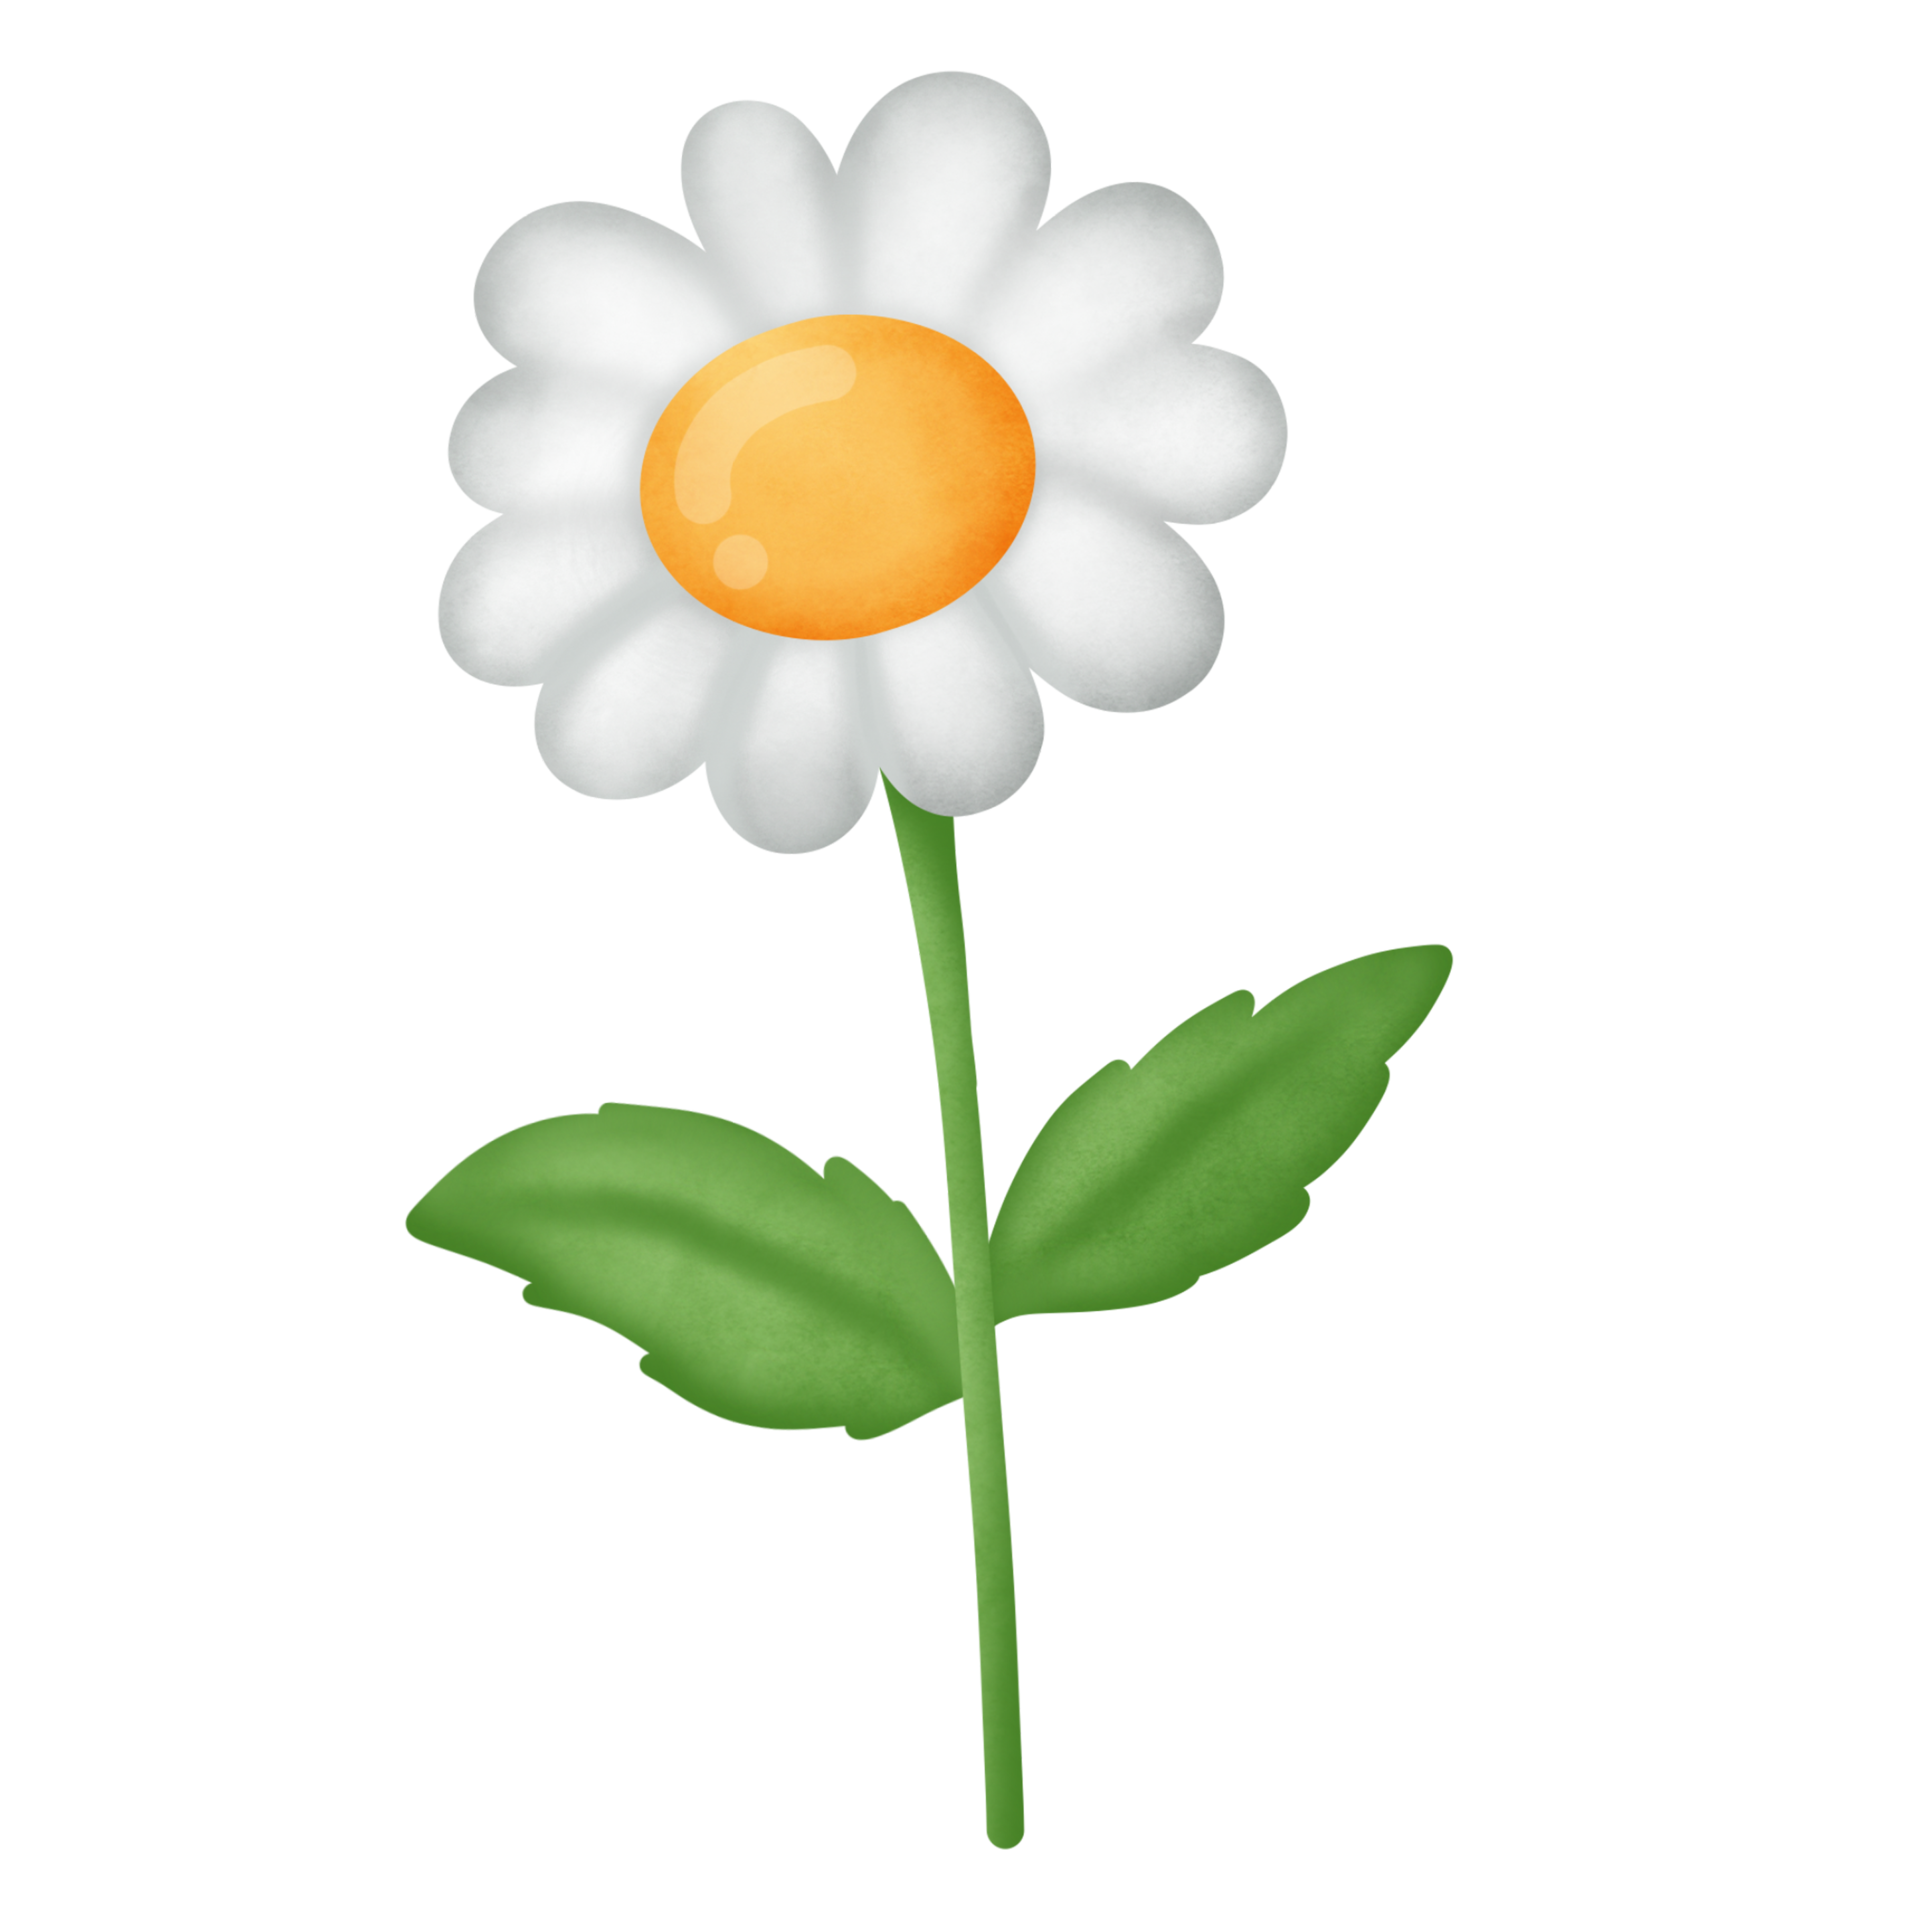 Daisy Flower Clipart 8505482 Png